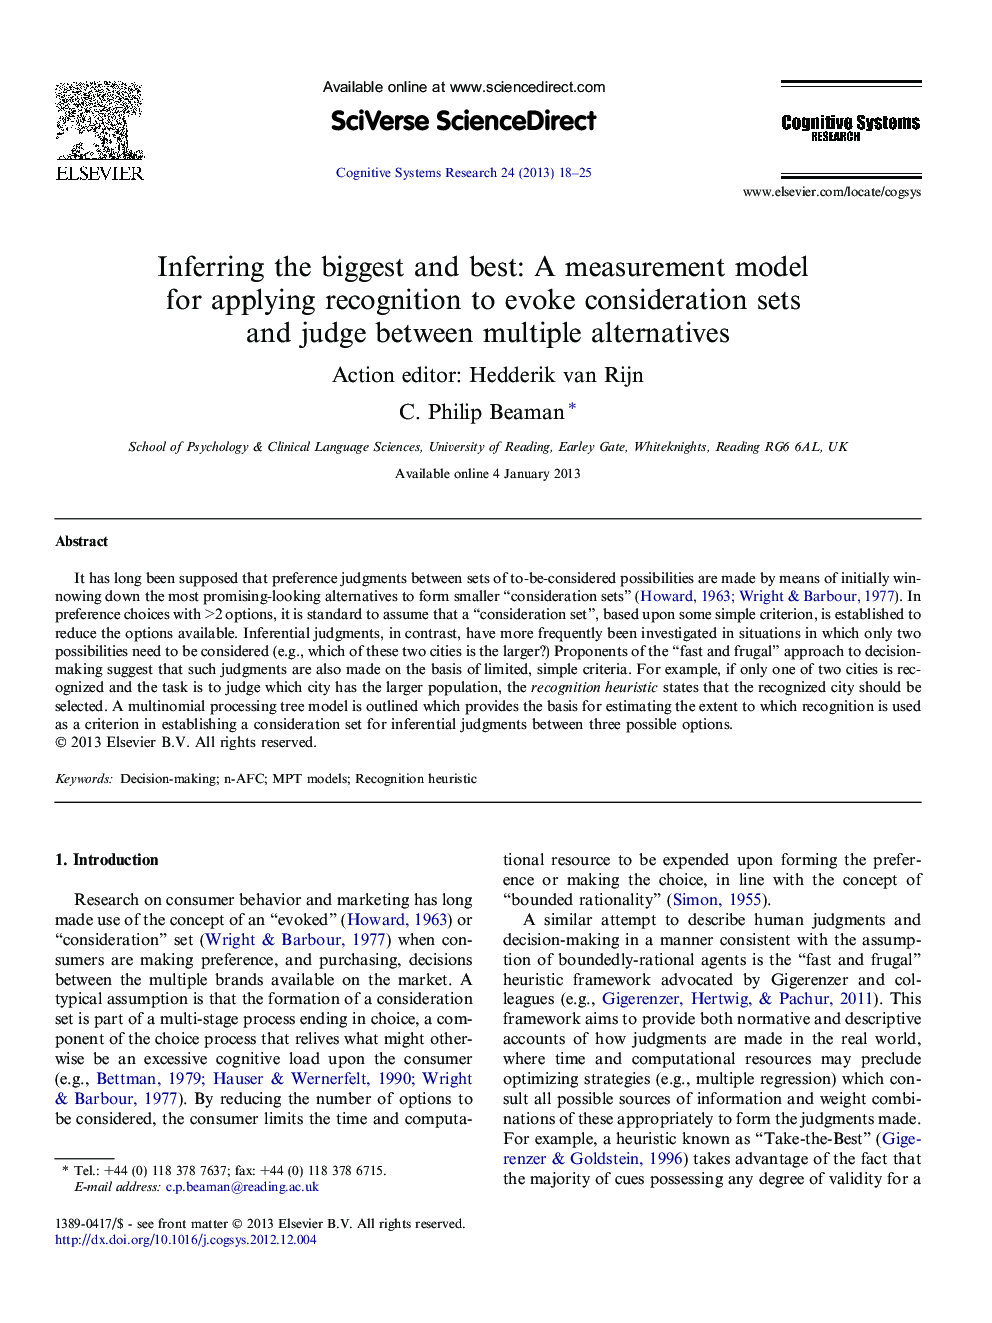 Inferring the biggest and best: A measurement model for applying recognition to evoke consideration sets and judge between multiple alternatives